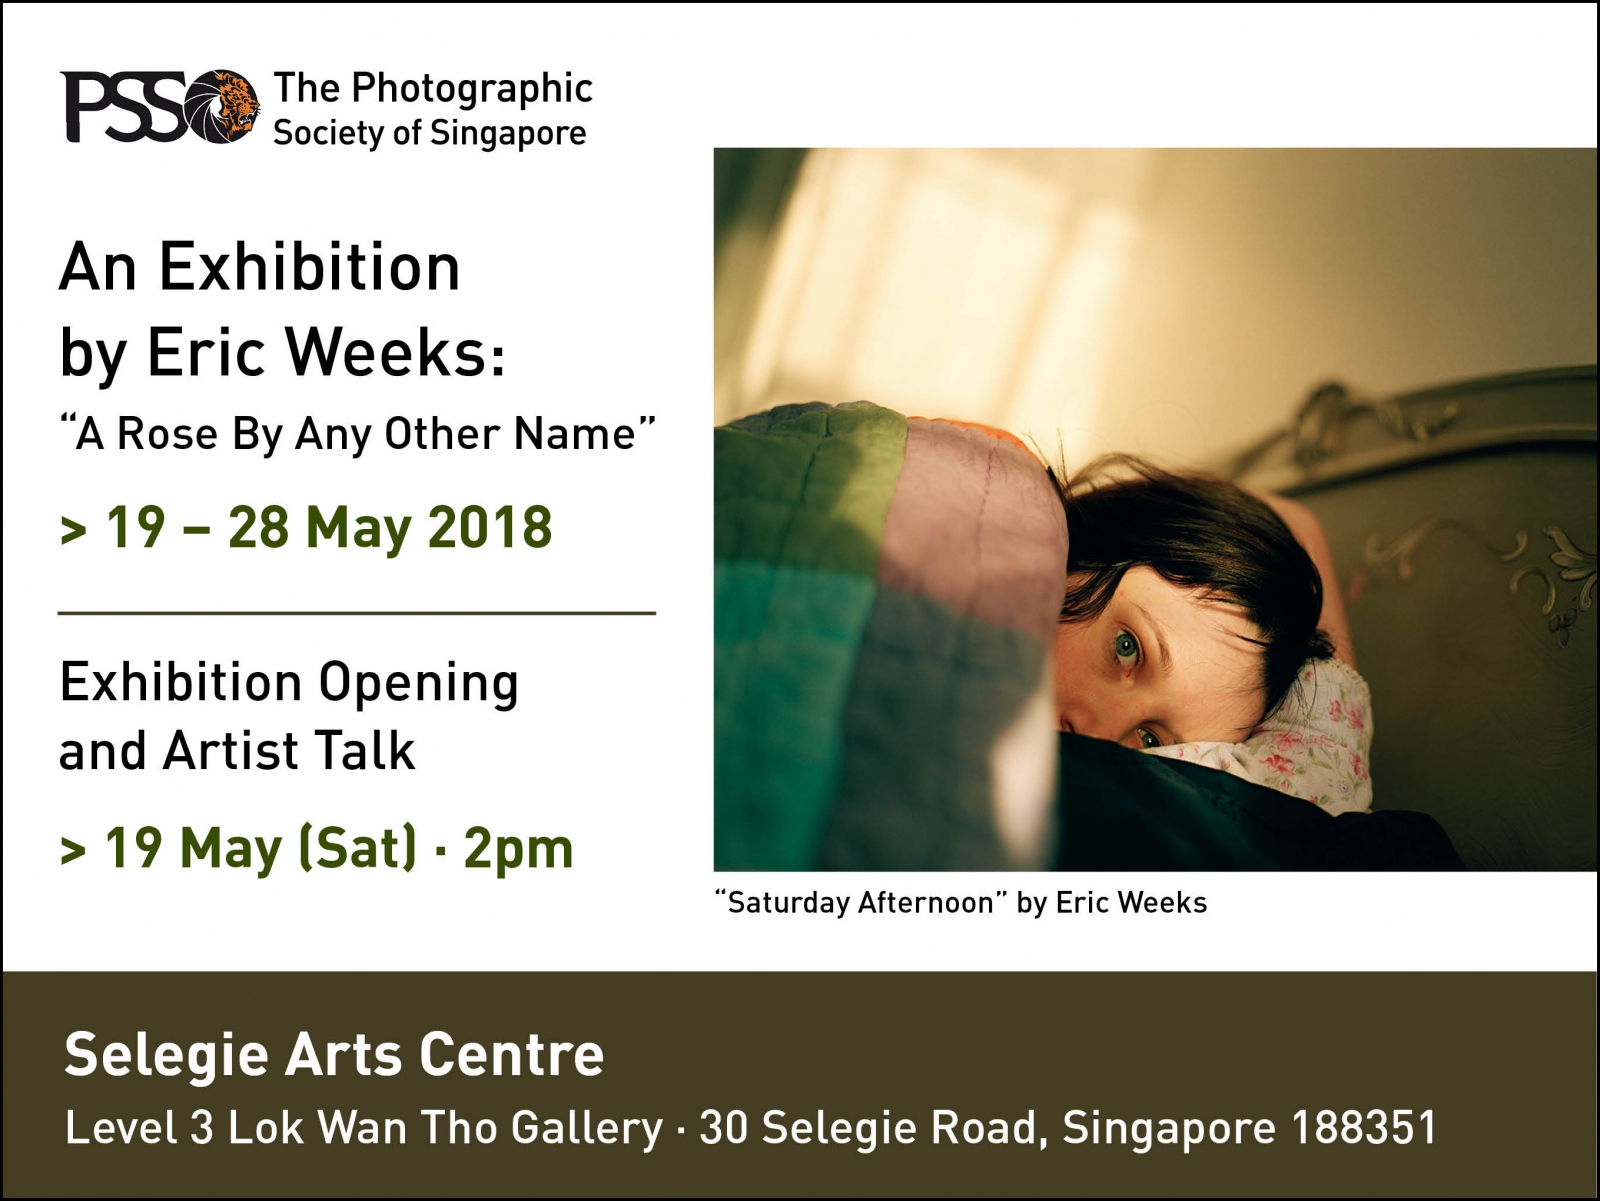 Exhibition: A Rose By Any Other Name